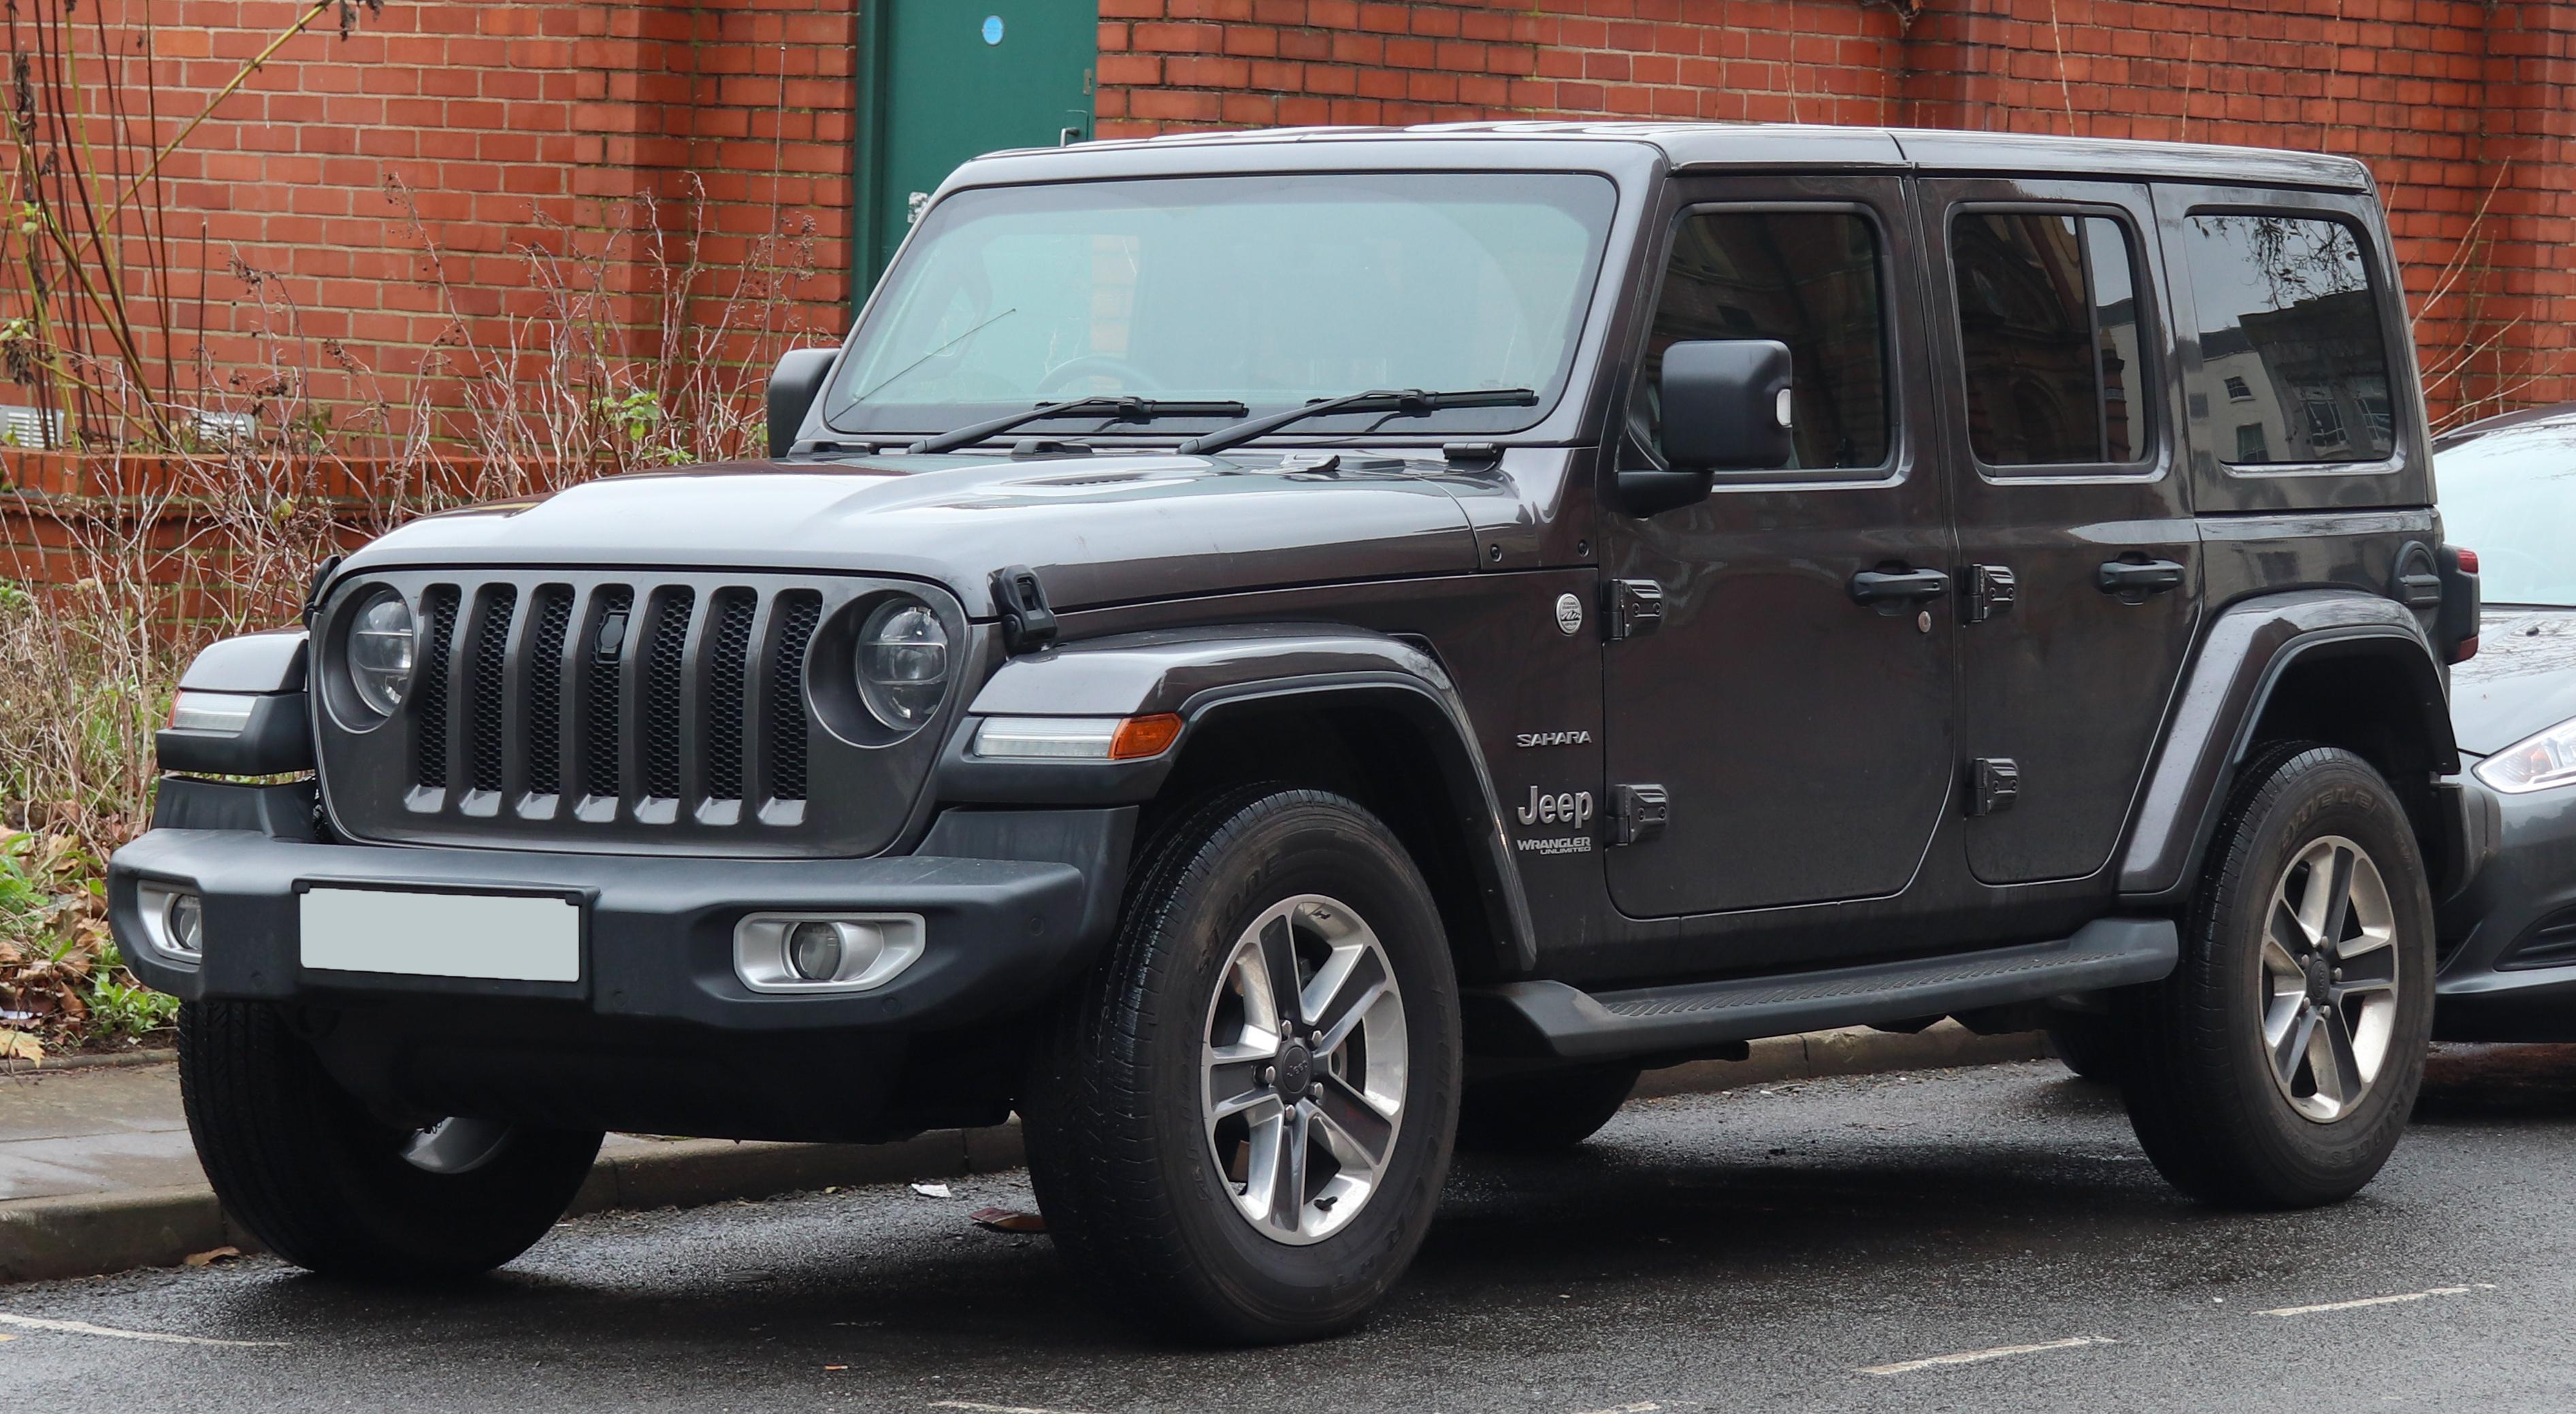 Off-road capabilities: Assessing the Jeep Wranglers performance in rugged terrain